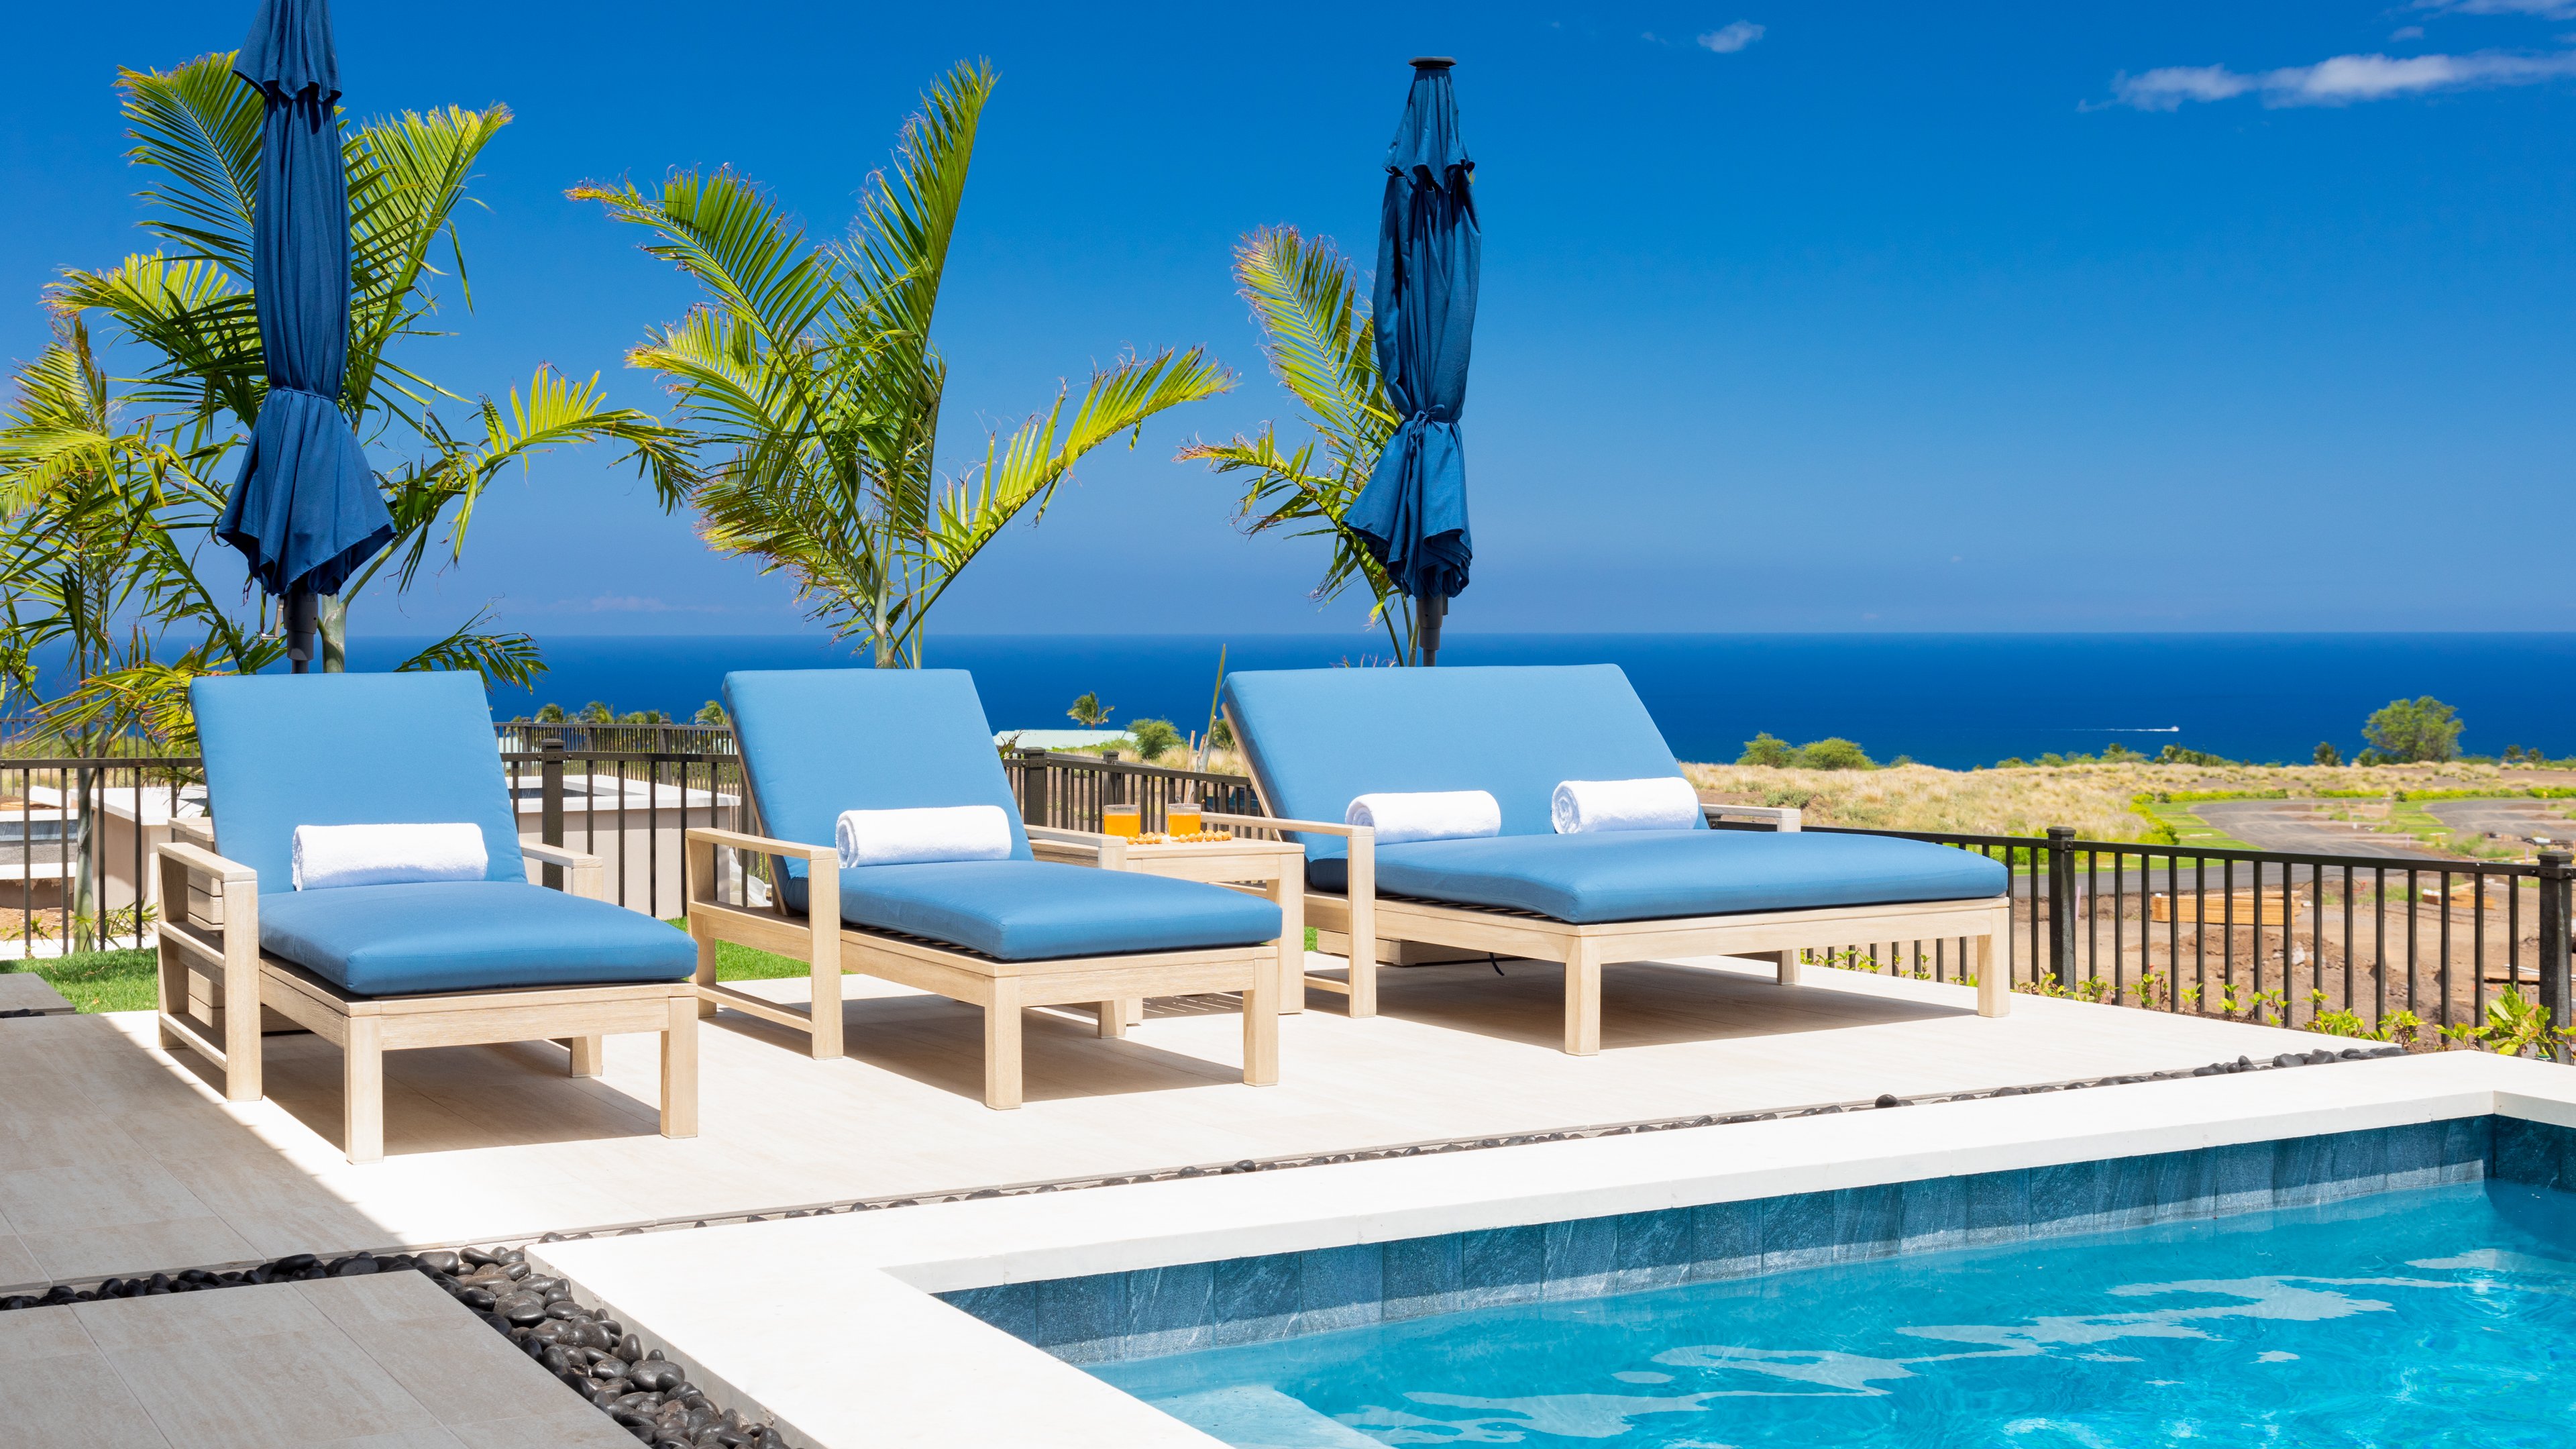 Soak up some rays and relax on your private lanai.